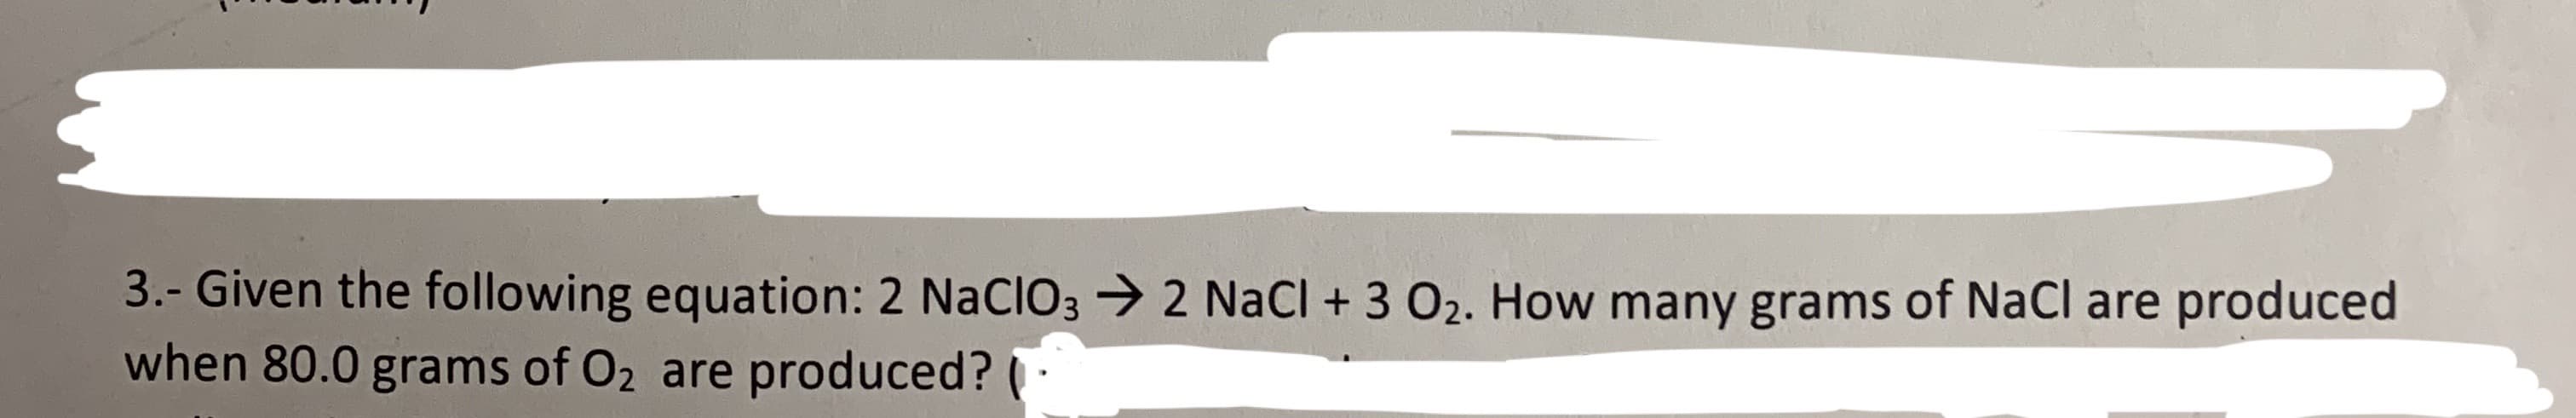 3.- Given the following equation: 2 NACIO32 NaCl + 3 O2. How many grams of NaCl are produced
when 80.0 grams of O2 are produced?
